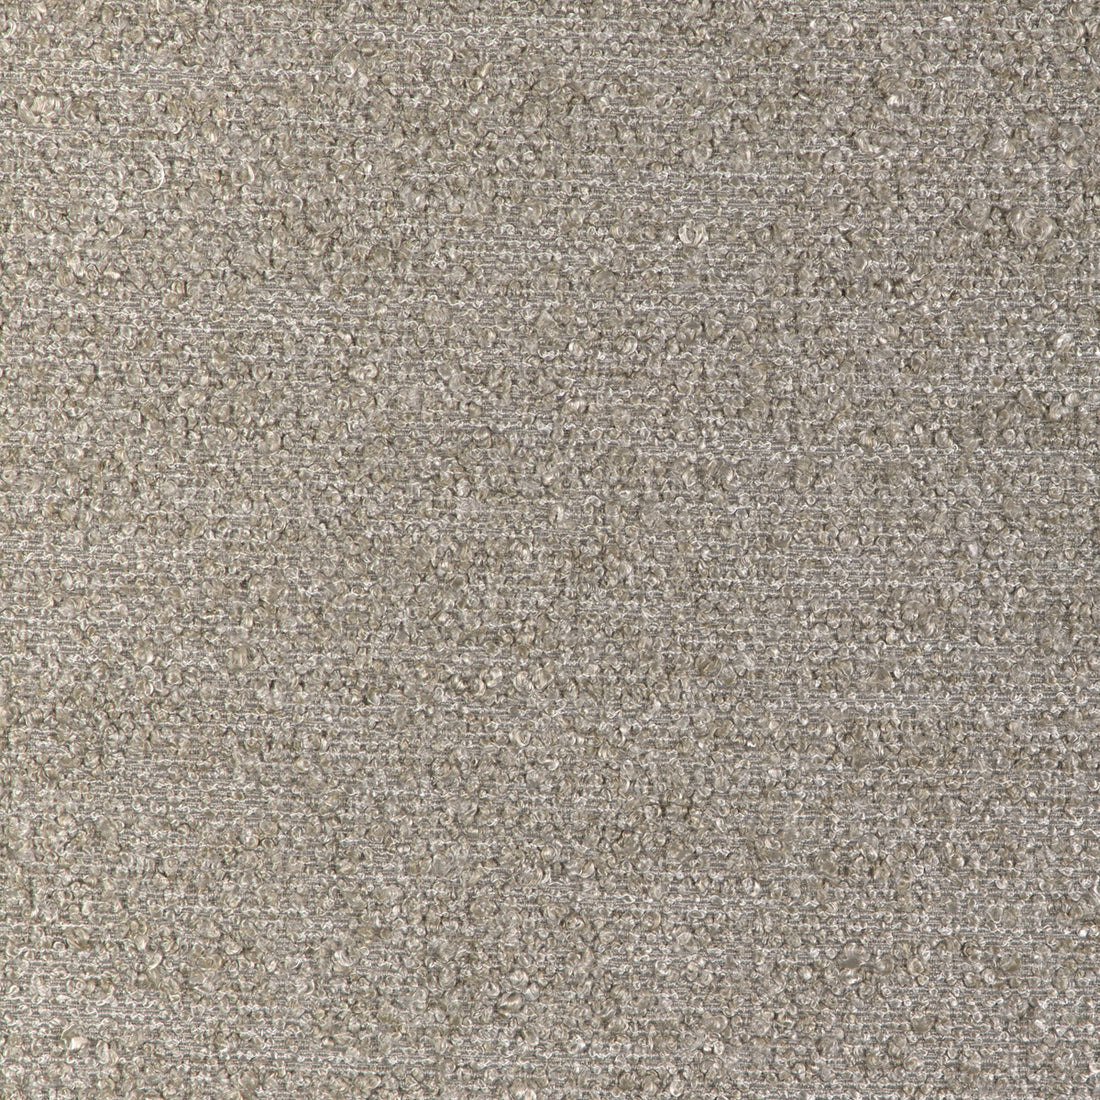 Kravet Design fabric in 36959-1621 color - pattern 36959.1621.0 - by Kravet Design in the Sustainable Textures II collection